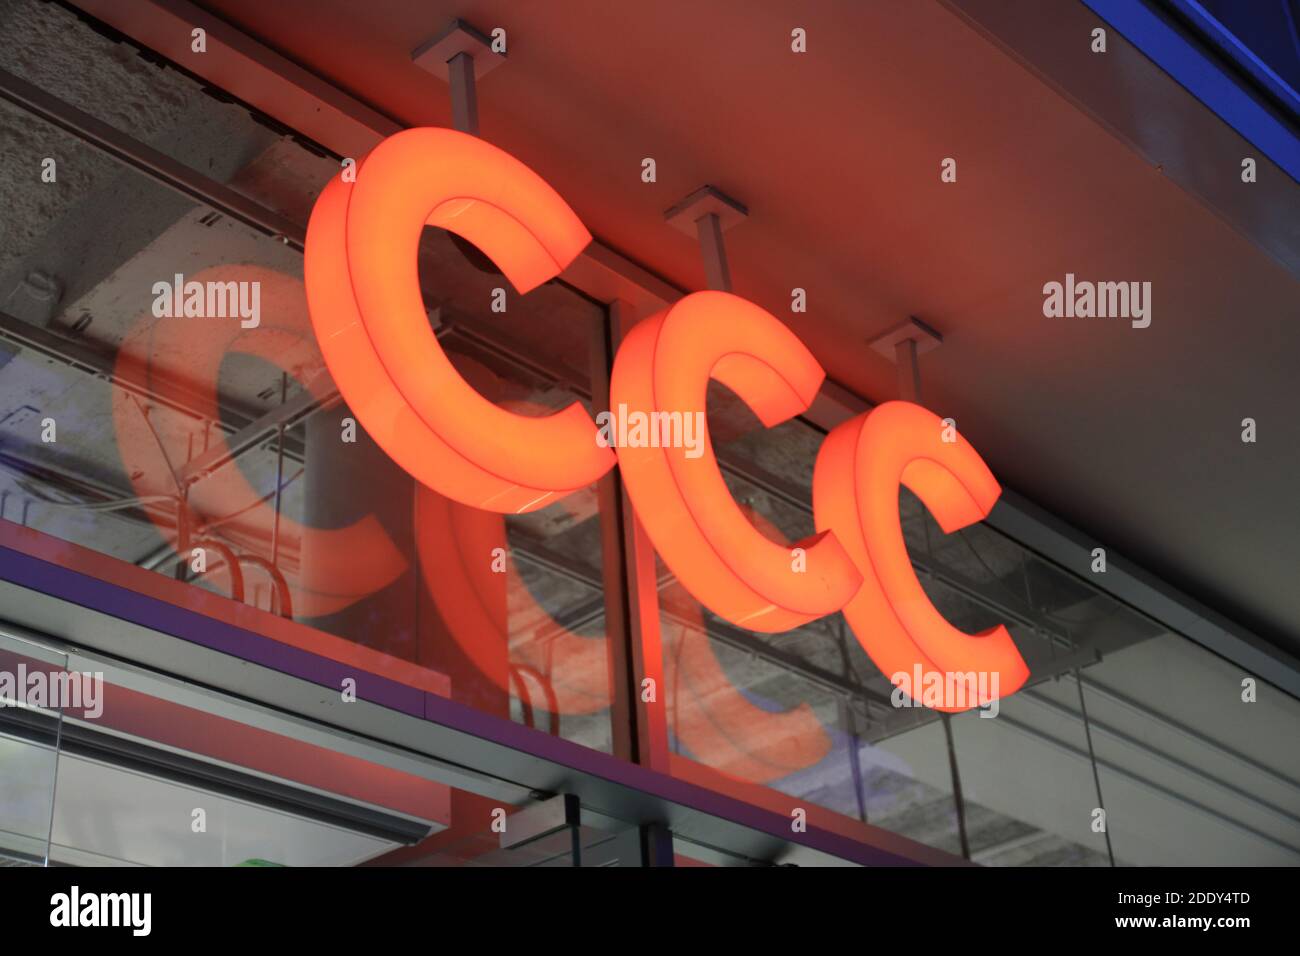 Berlin, Germany - November 14, 2020: CCC Shoes sign in front of their local shop in Berlin Stock Photo